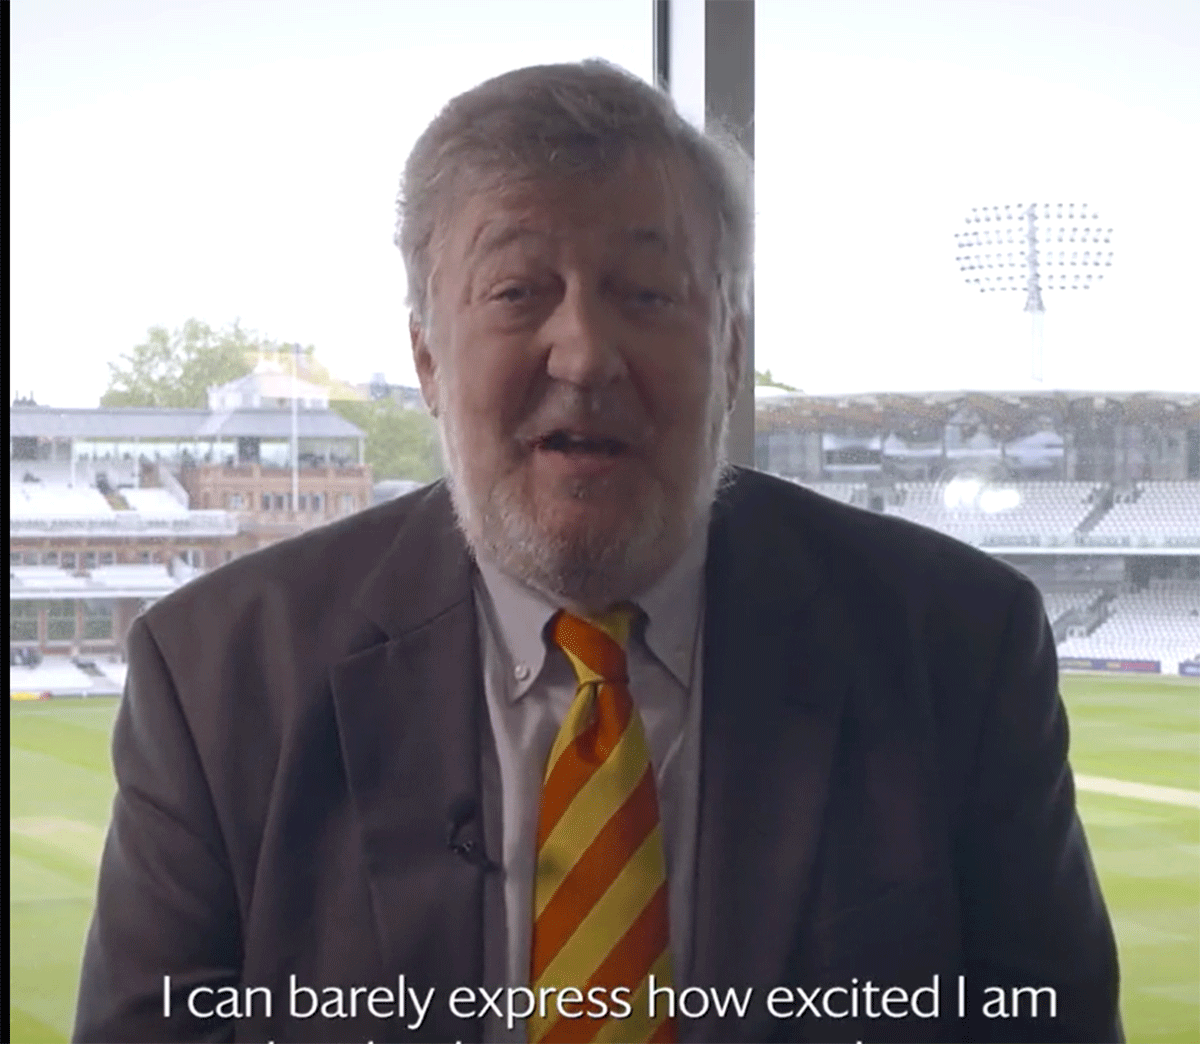 An MCC member since 2011, Stephen Fry said he was "honoured and proud" at the nomination.